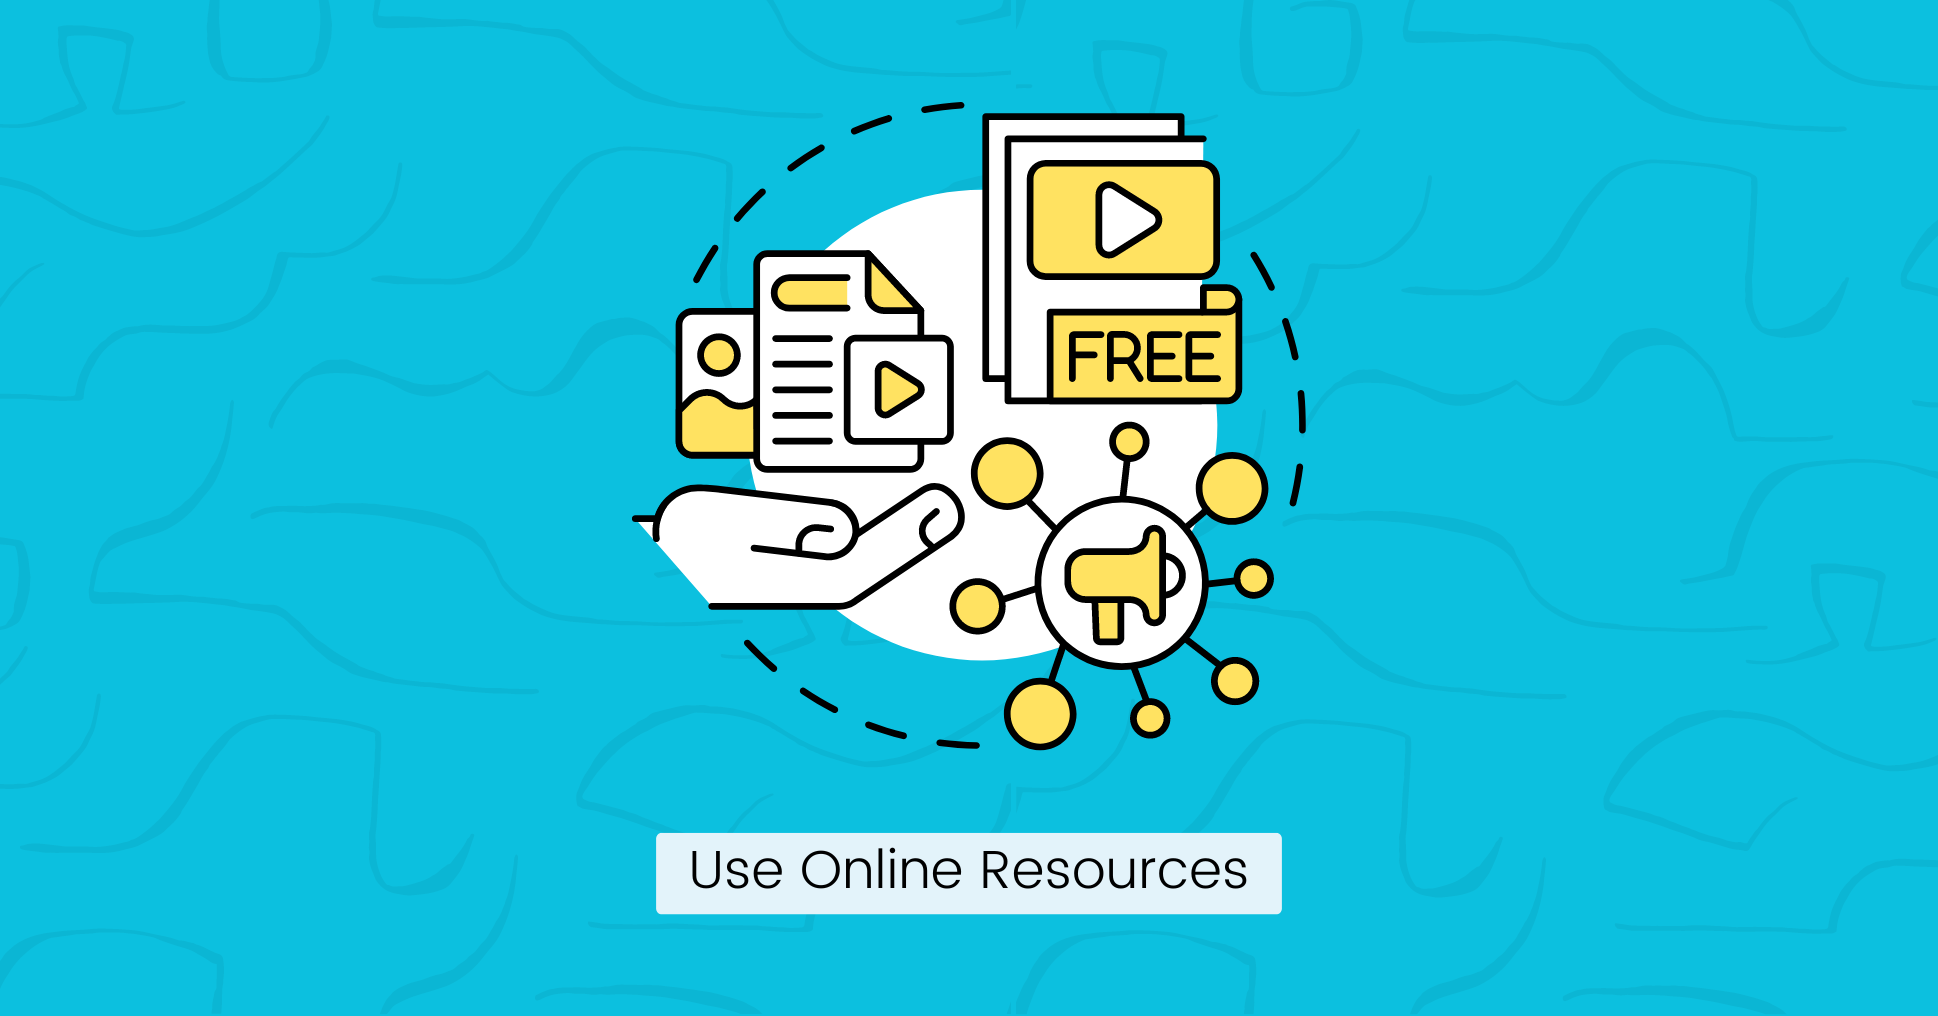 Use Online Resources